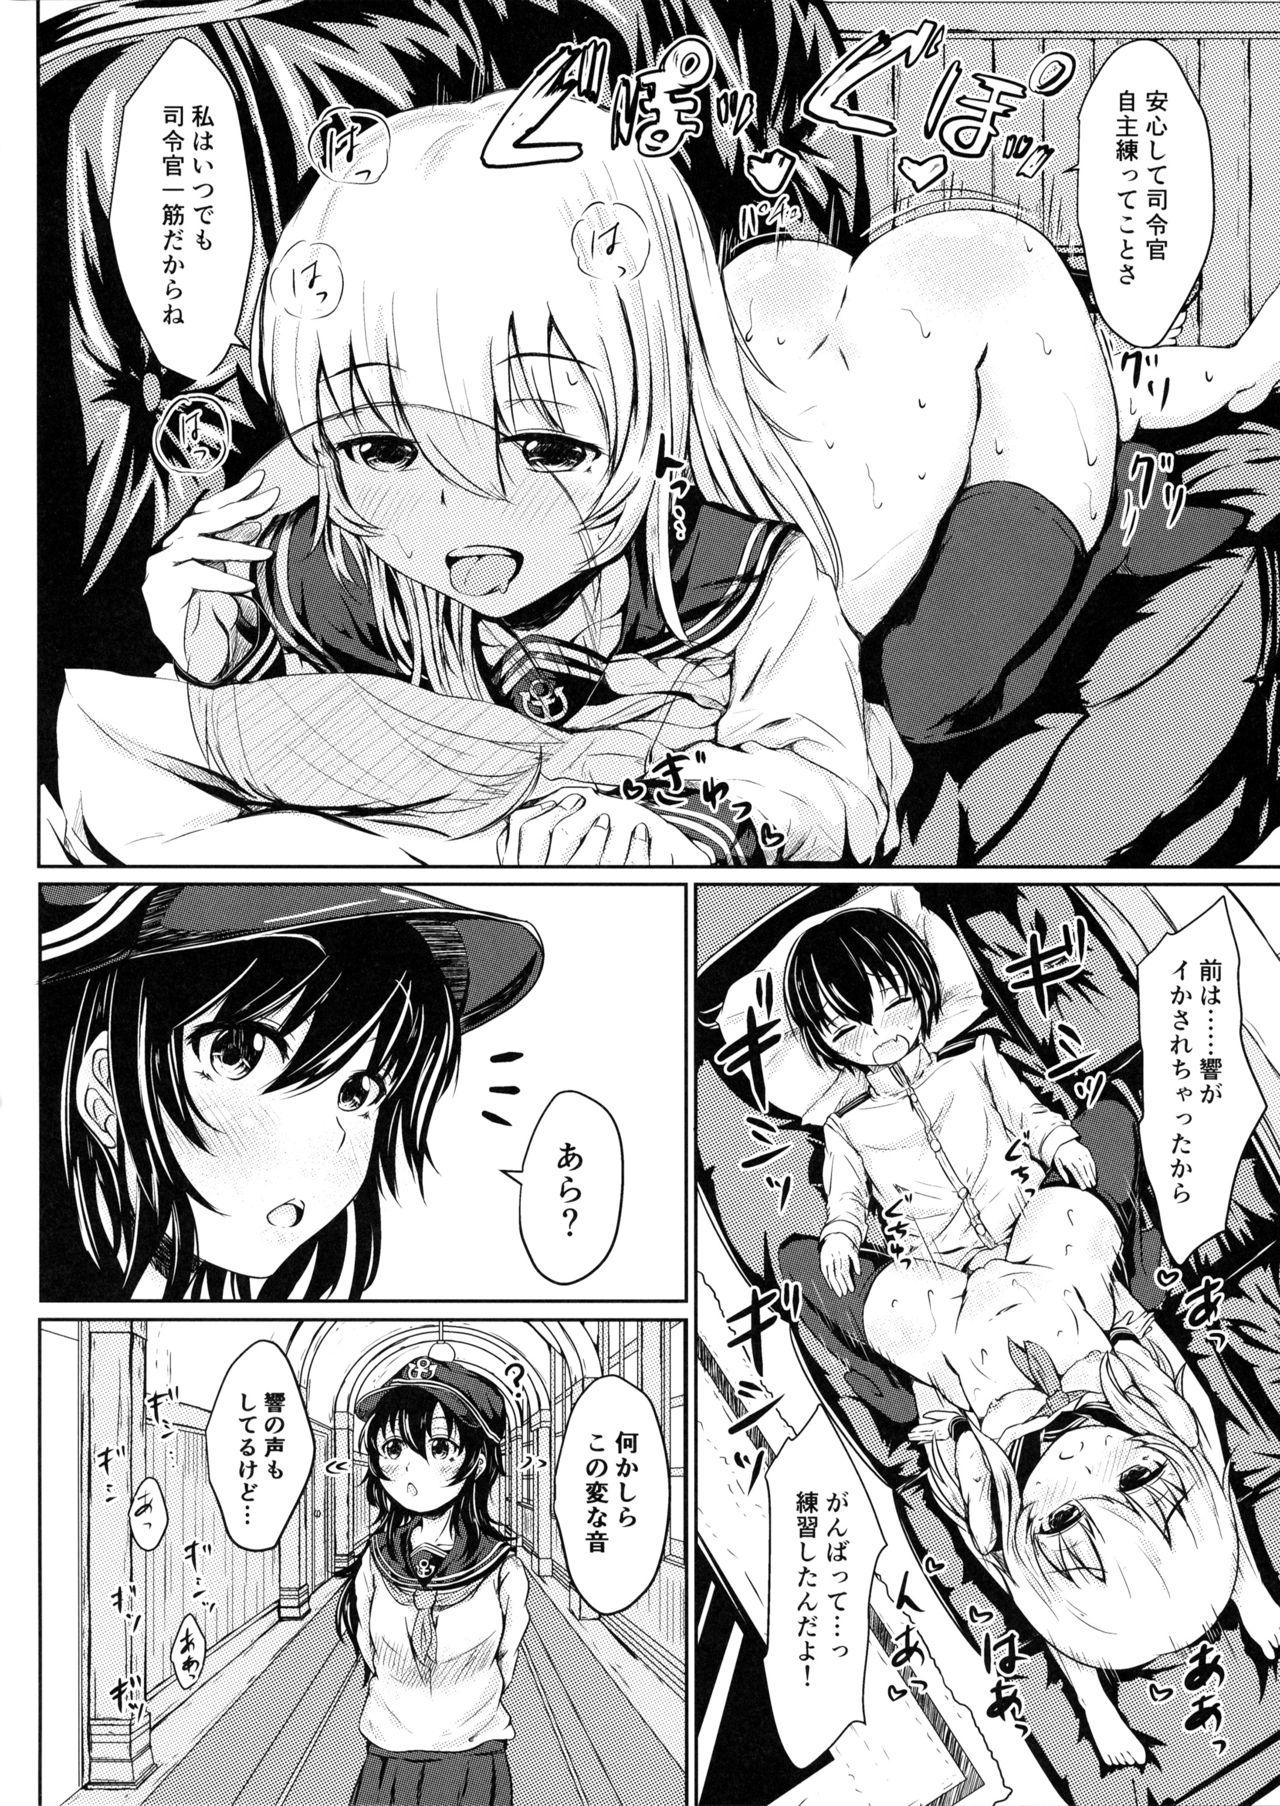 Young Tits Hibiki datte Onee-chan 2 - Kantai collection Voyeur - Page 11